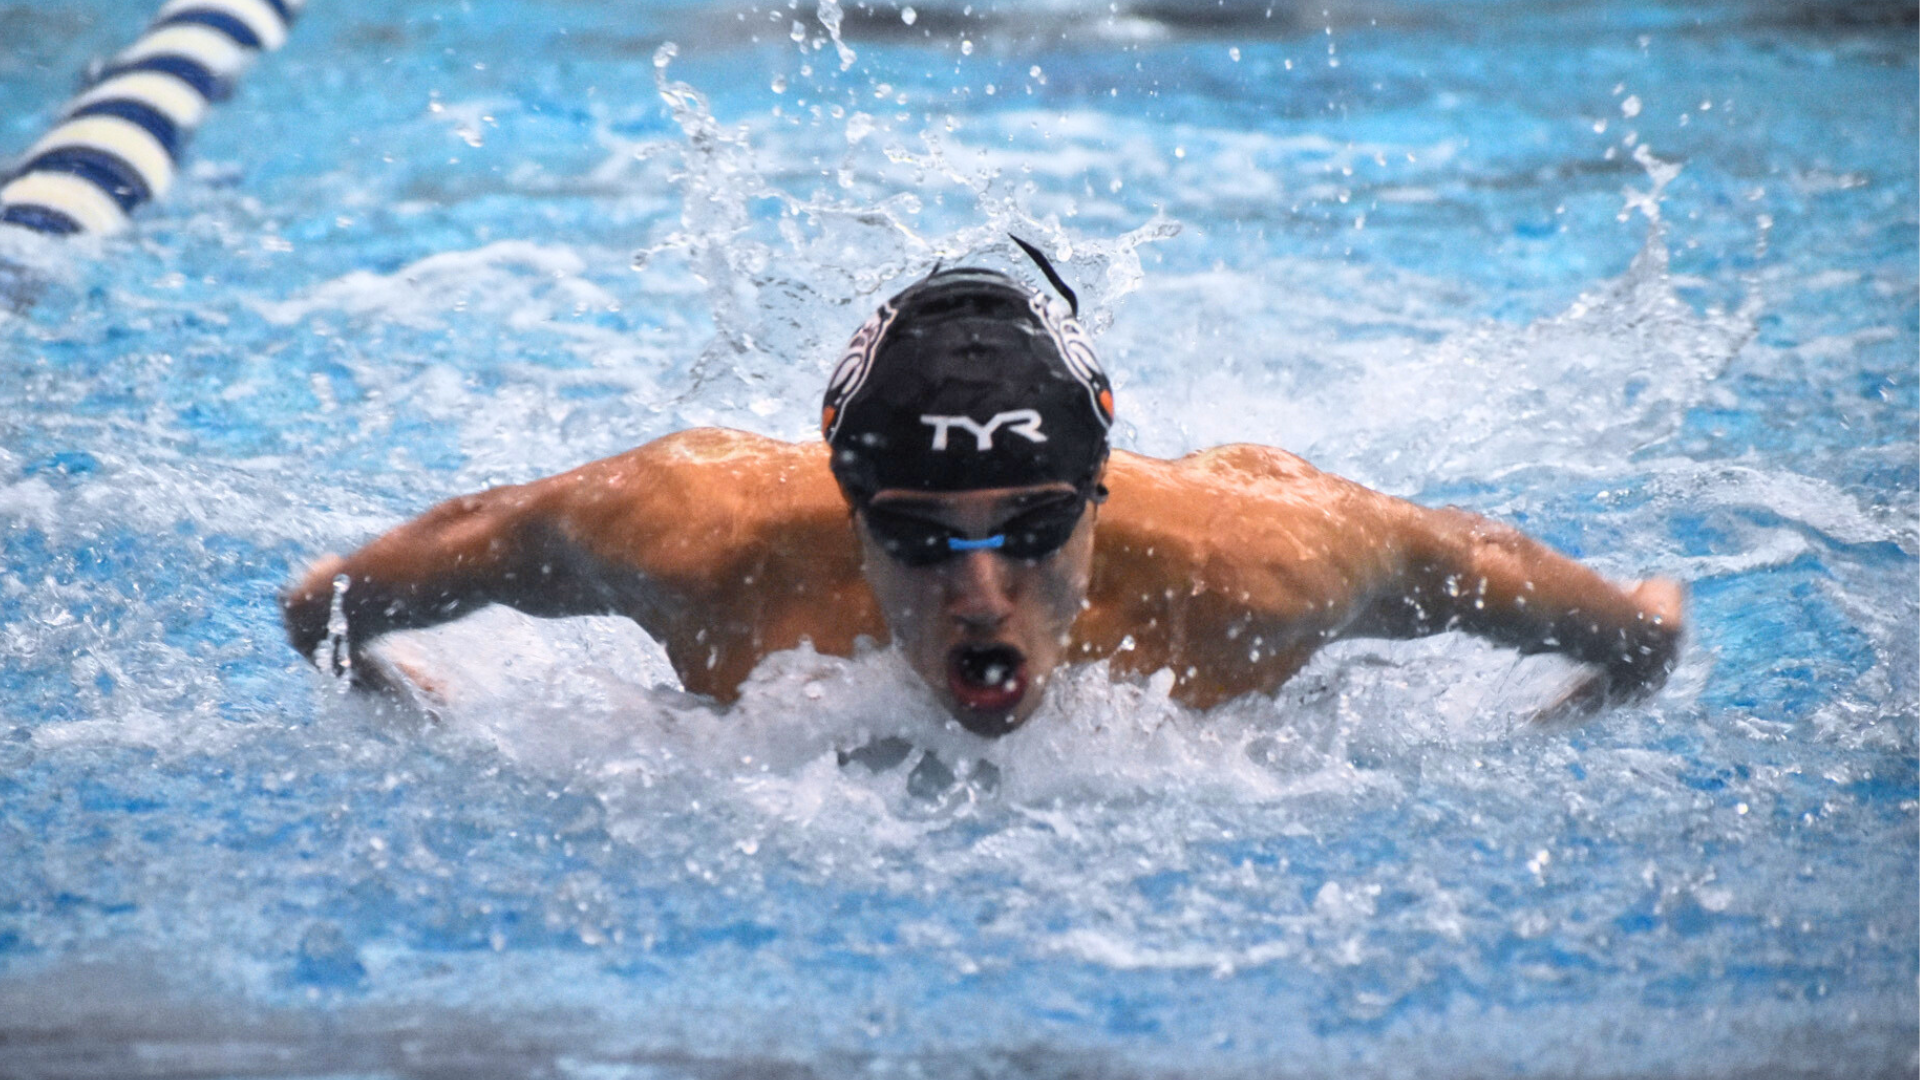 The Bulldogs earn eight first-place finishes in their final meet of the regular season